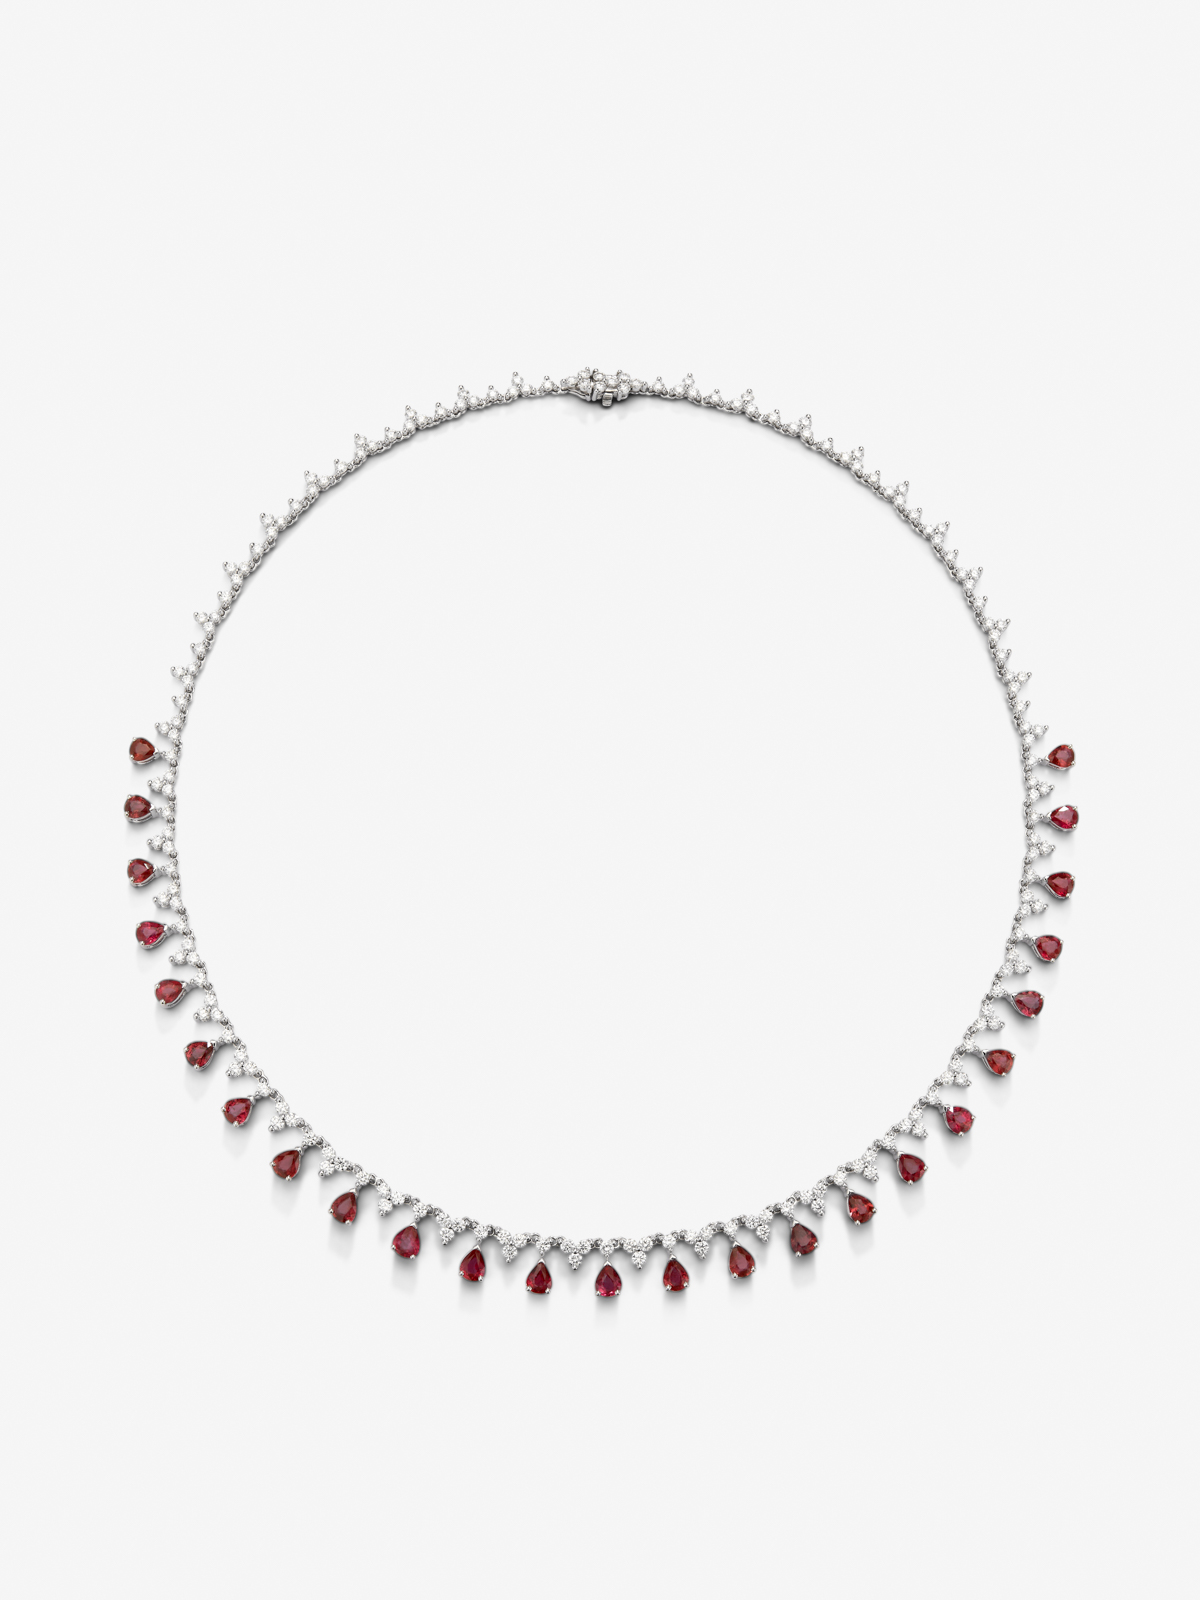 18K White Gold Rivière Collar with Red Rubyes in PESA Size 8.53 cts and White Diamonds in Bright Size 7.63 CTS